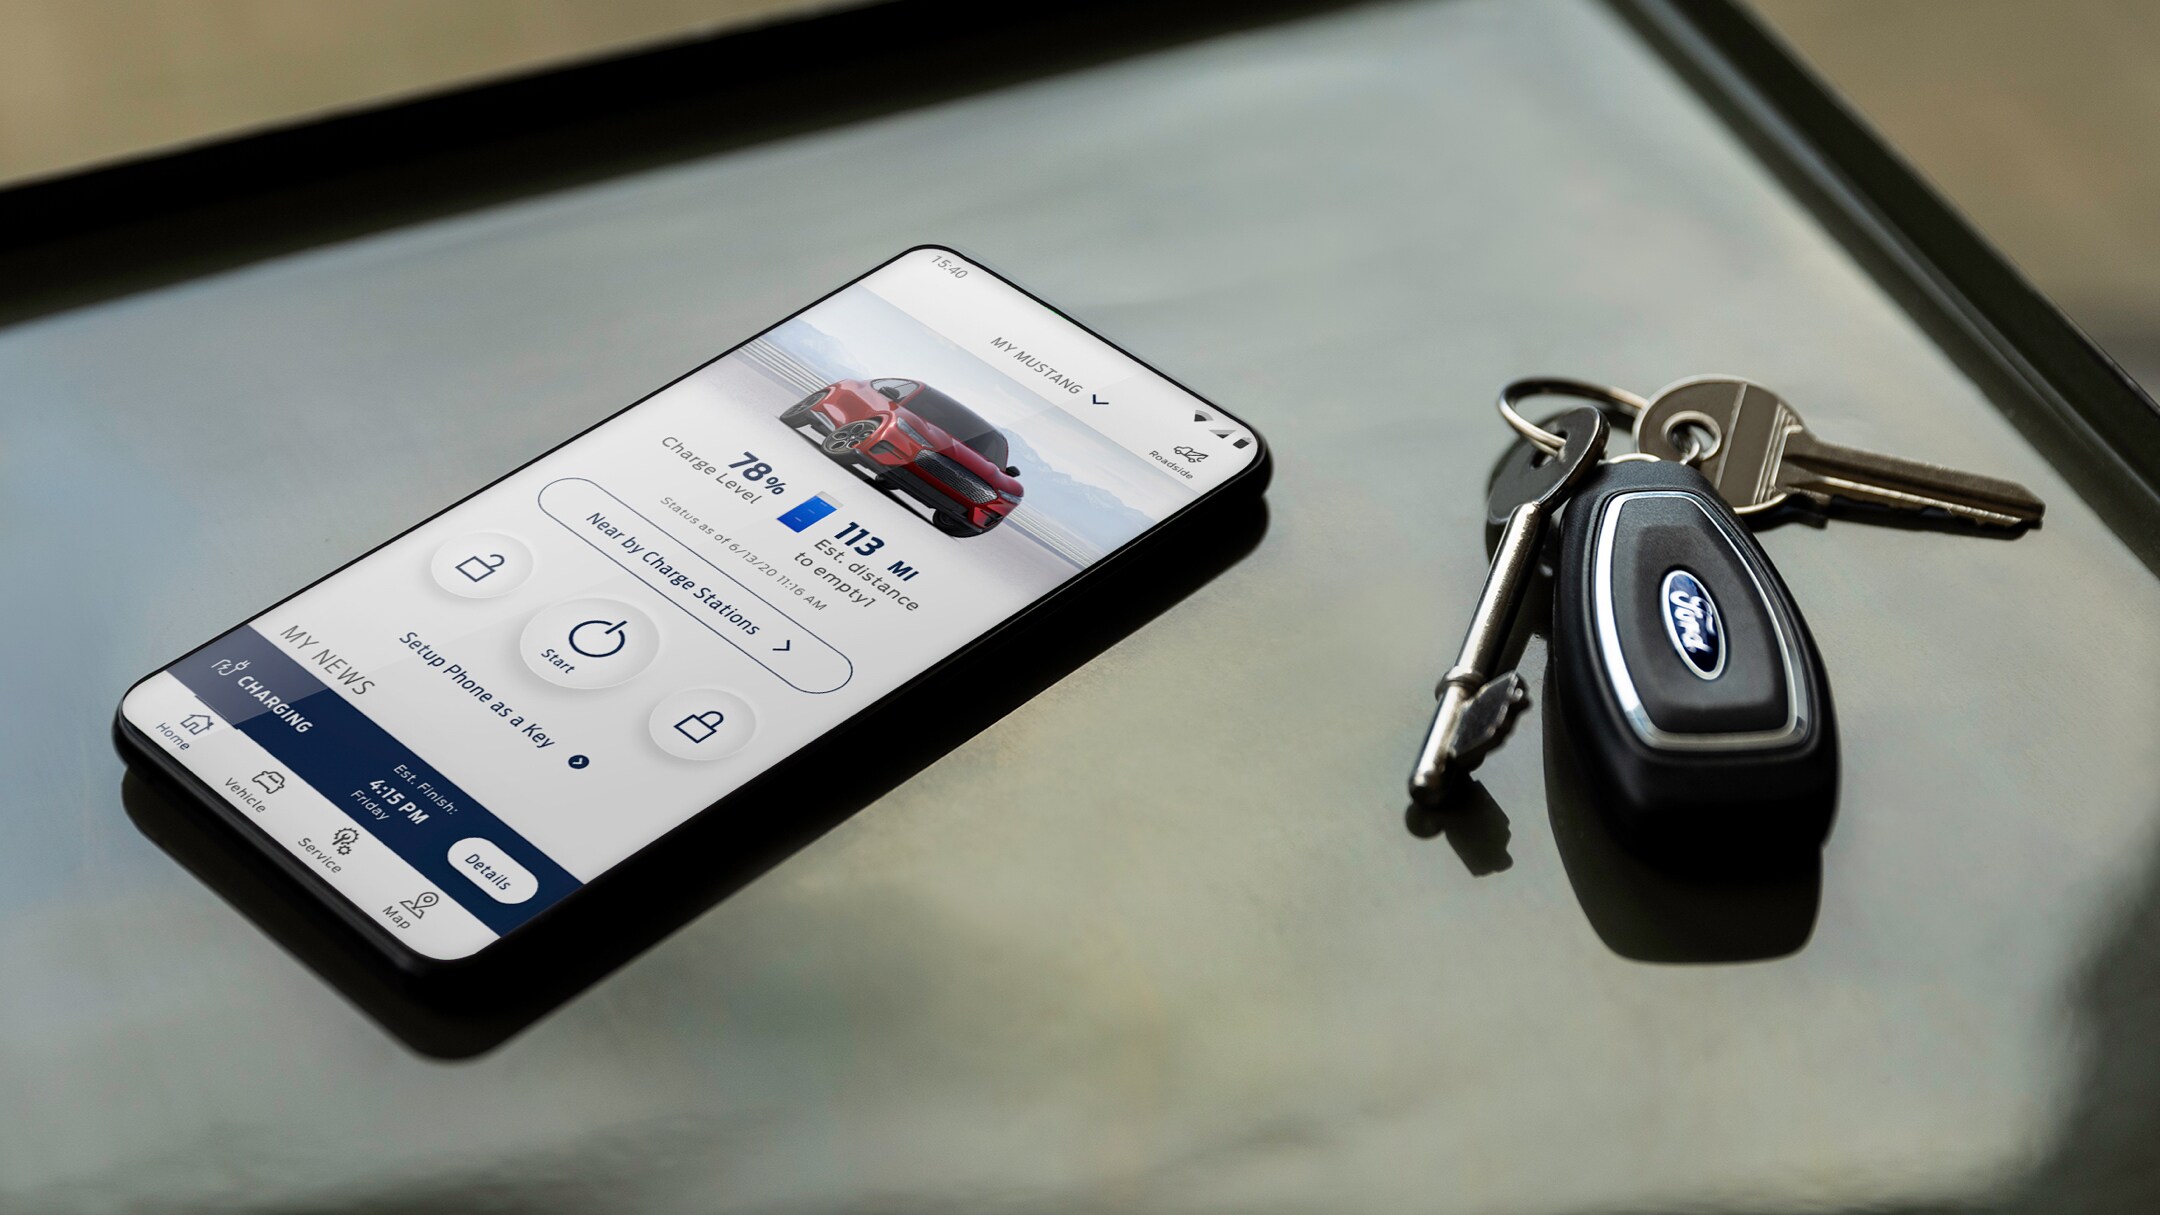 A phone showing the FordPass App on its screen sitting on a desk next to some car keys.